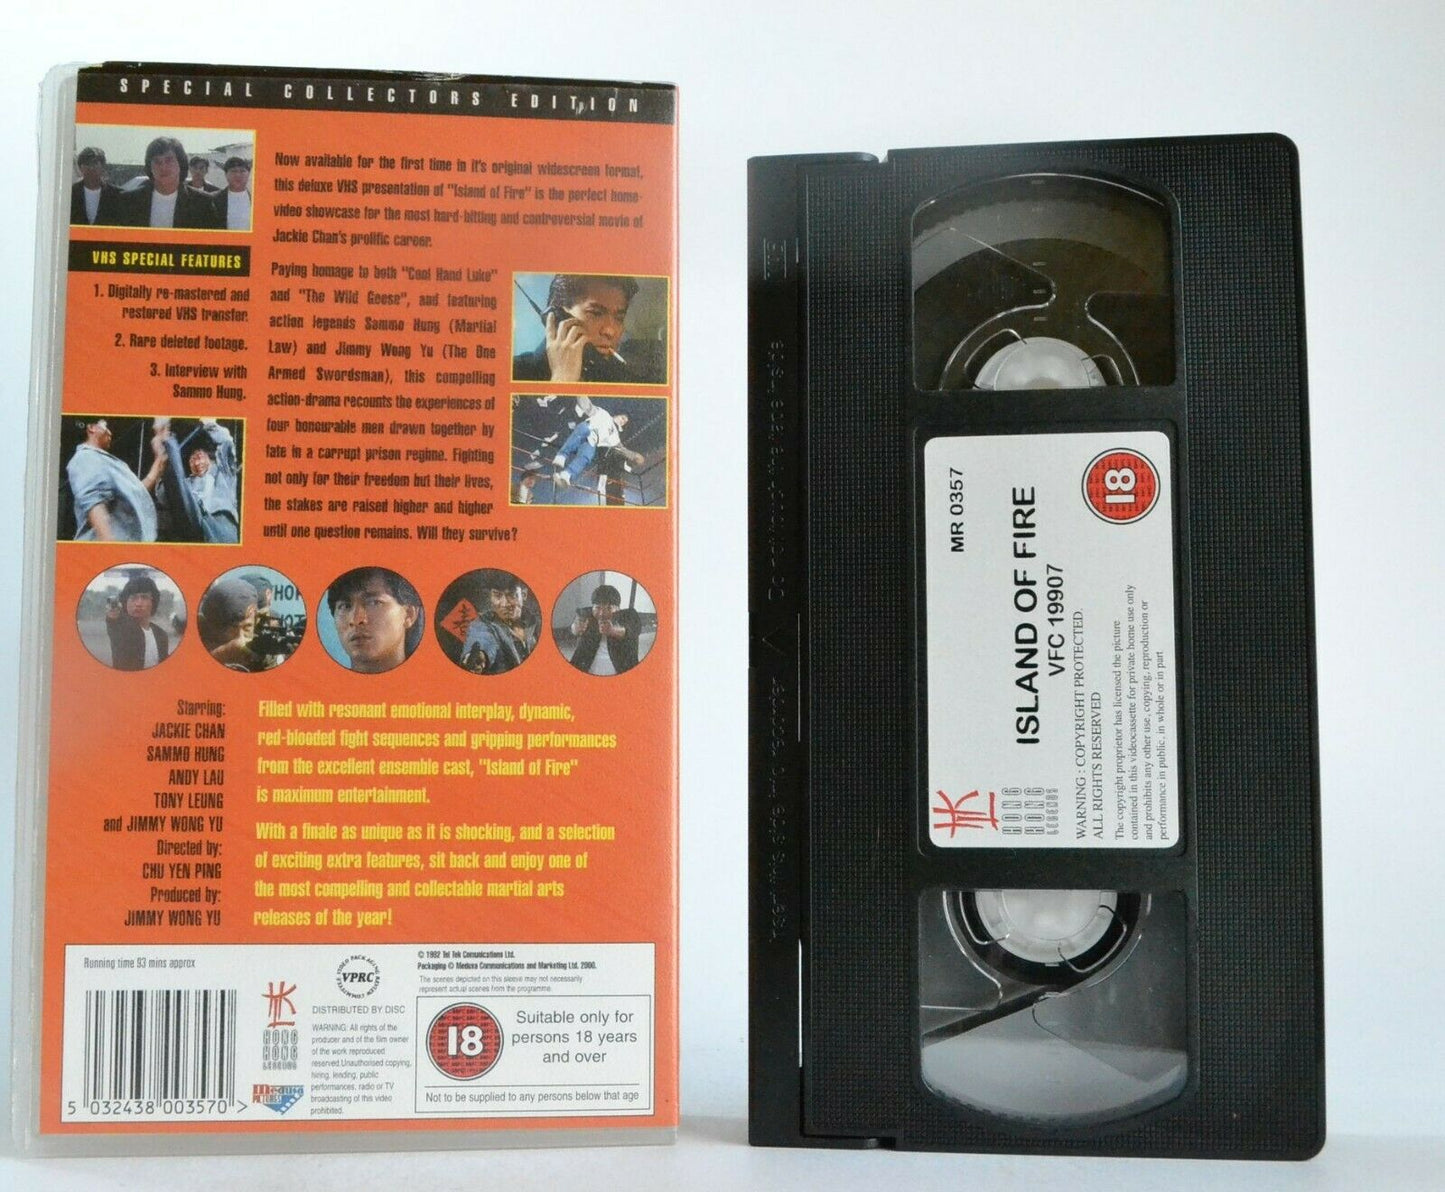 Island Of Fire: Collector's Edition - Widescreen - Martial Arts - J.Chan - VHS-